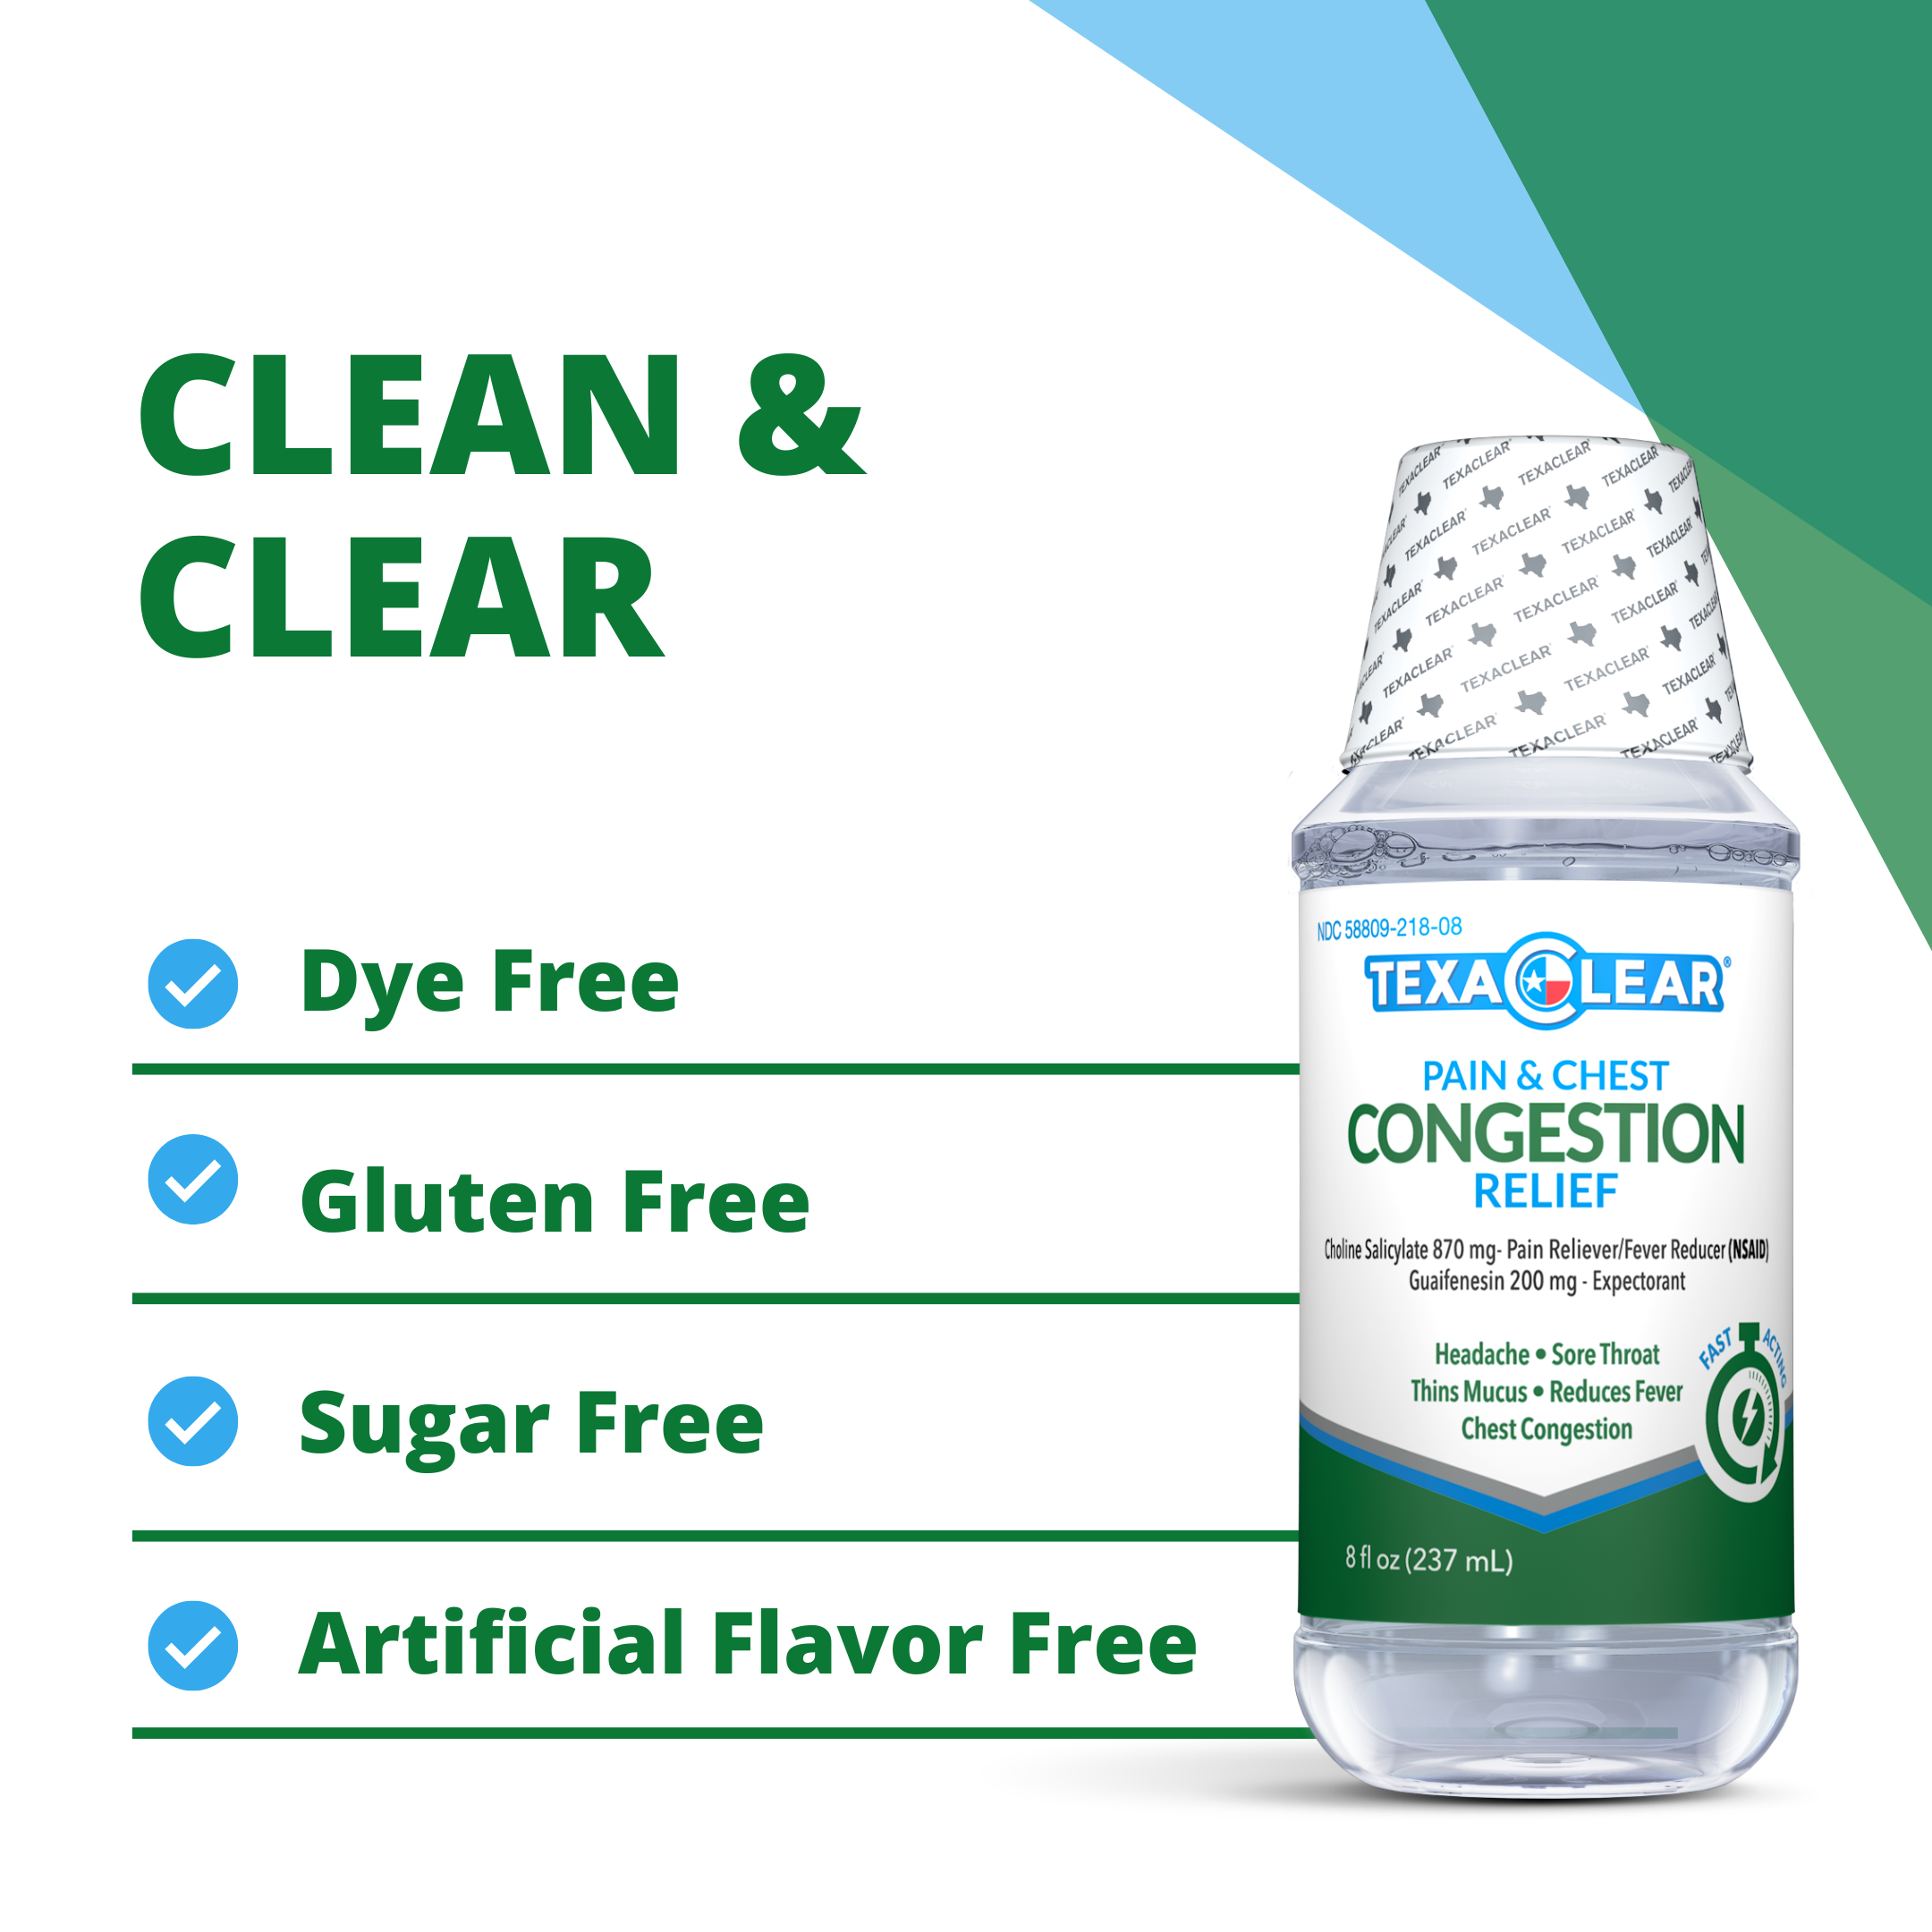 TexaClear® Pain and Chest Congestion Relief